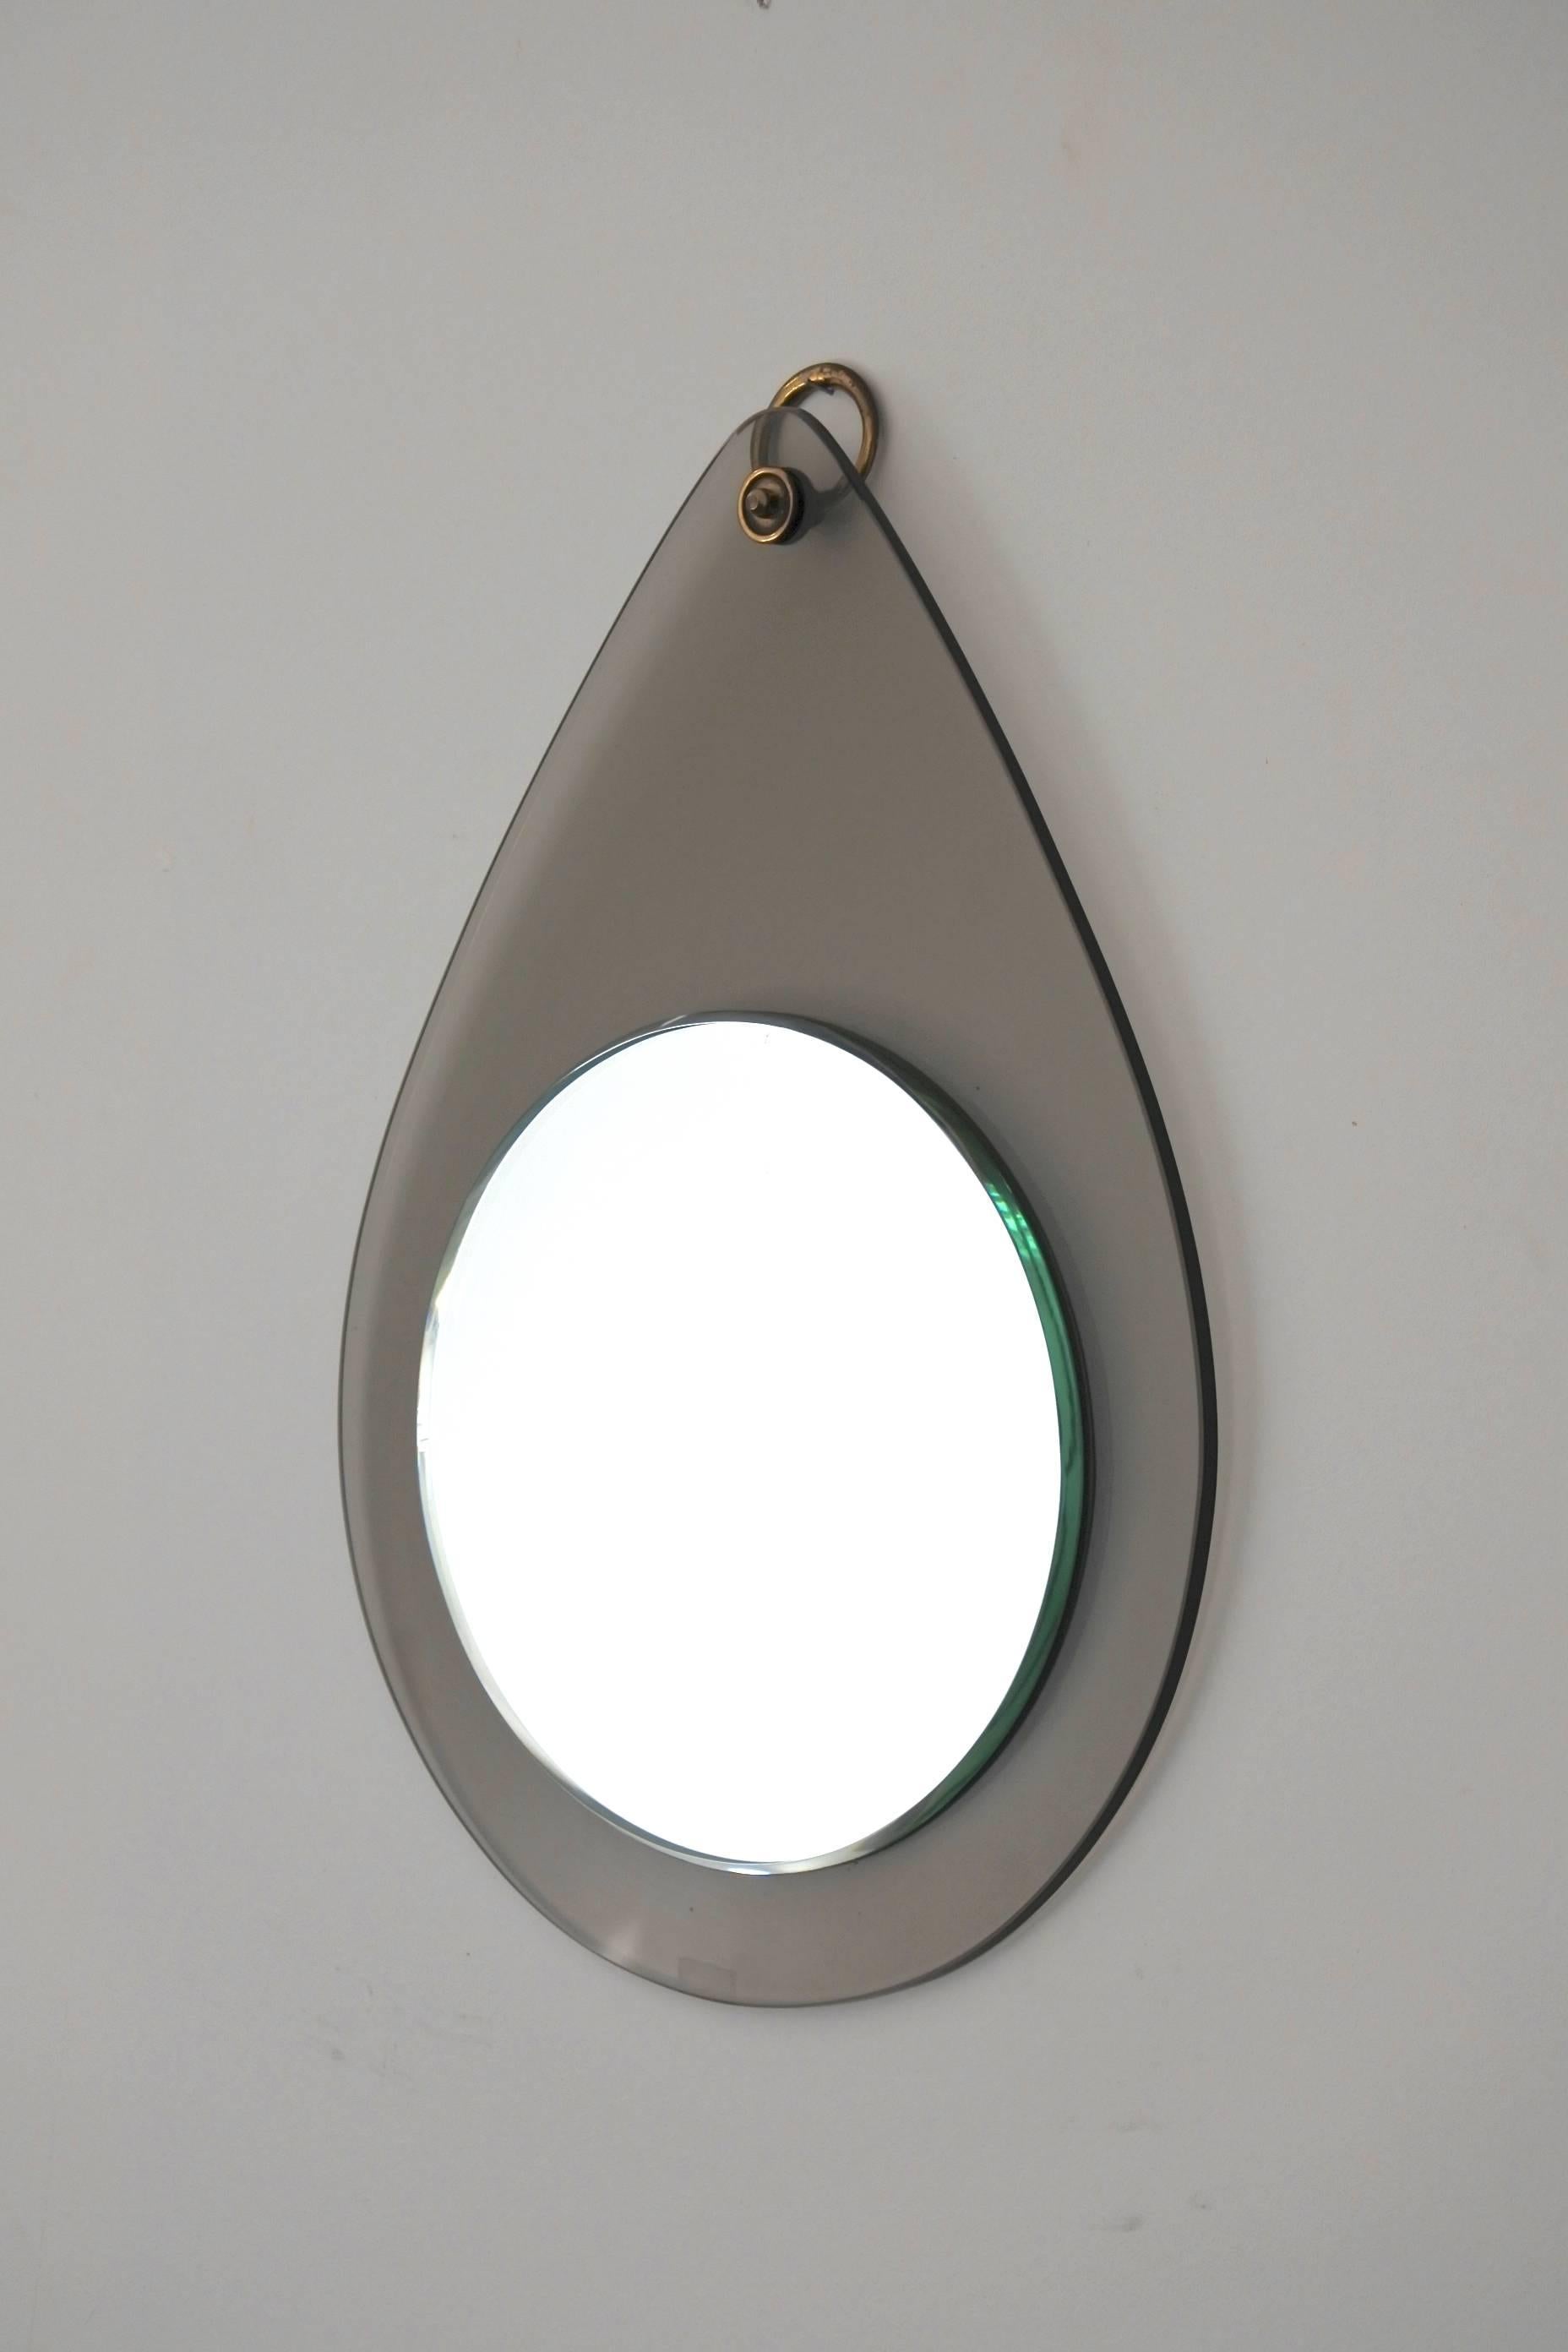 Midcentury Italian drop shaped glass mirror in the manner of Fontana Arte or Cristal Art.
It features a stylish brass hanging ring,
circa 1960.
Excellent condition.